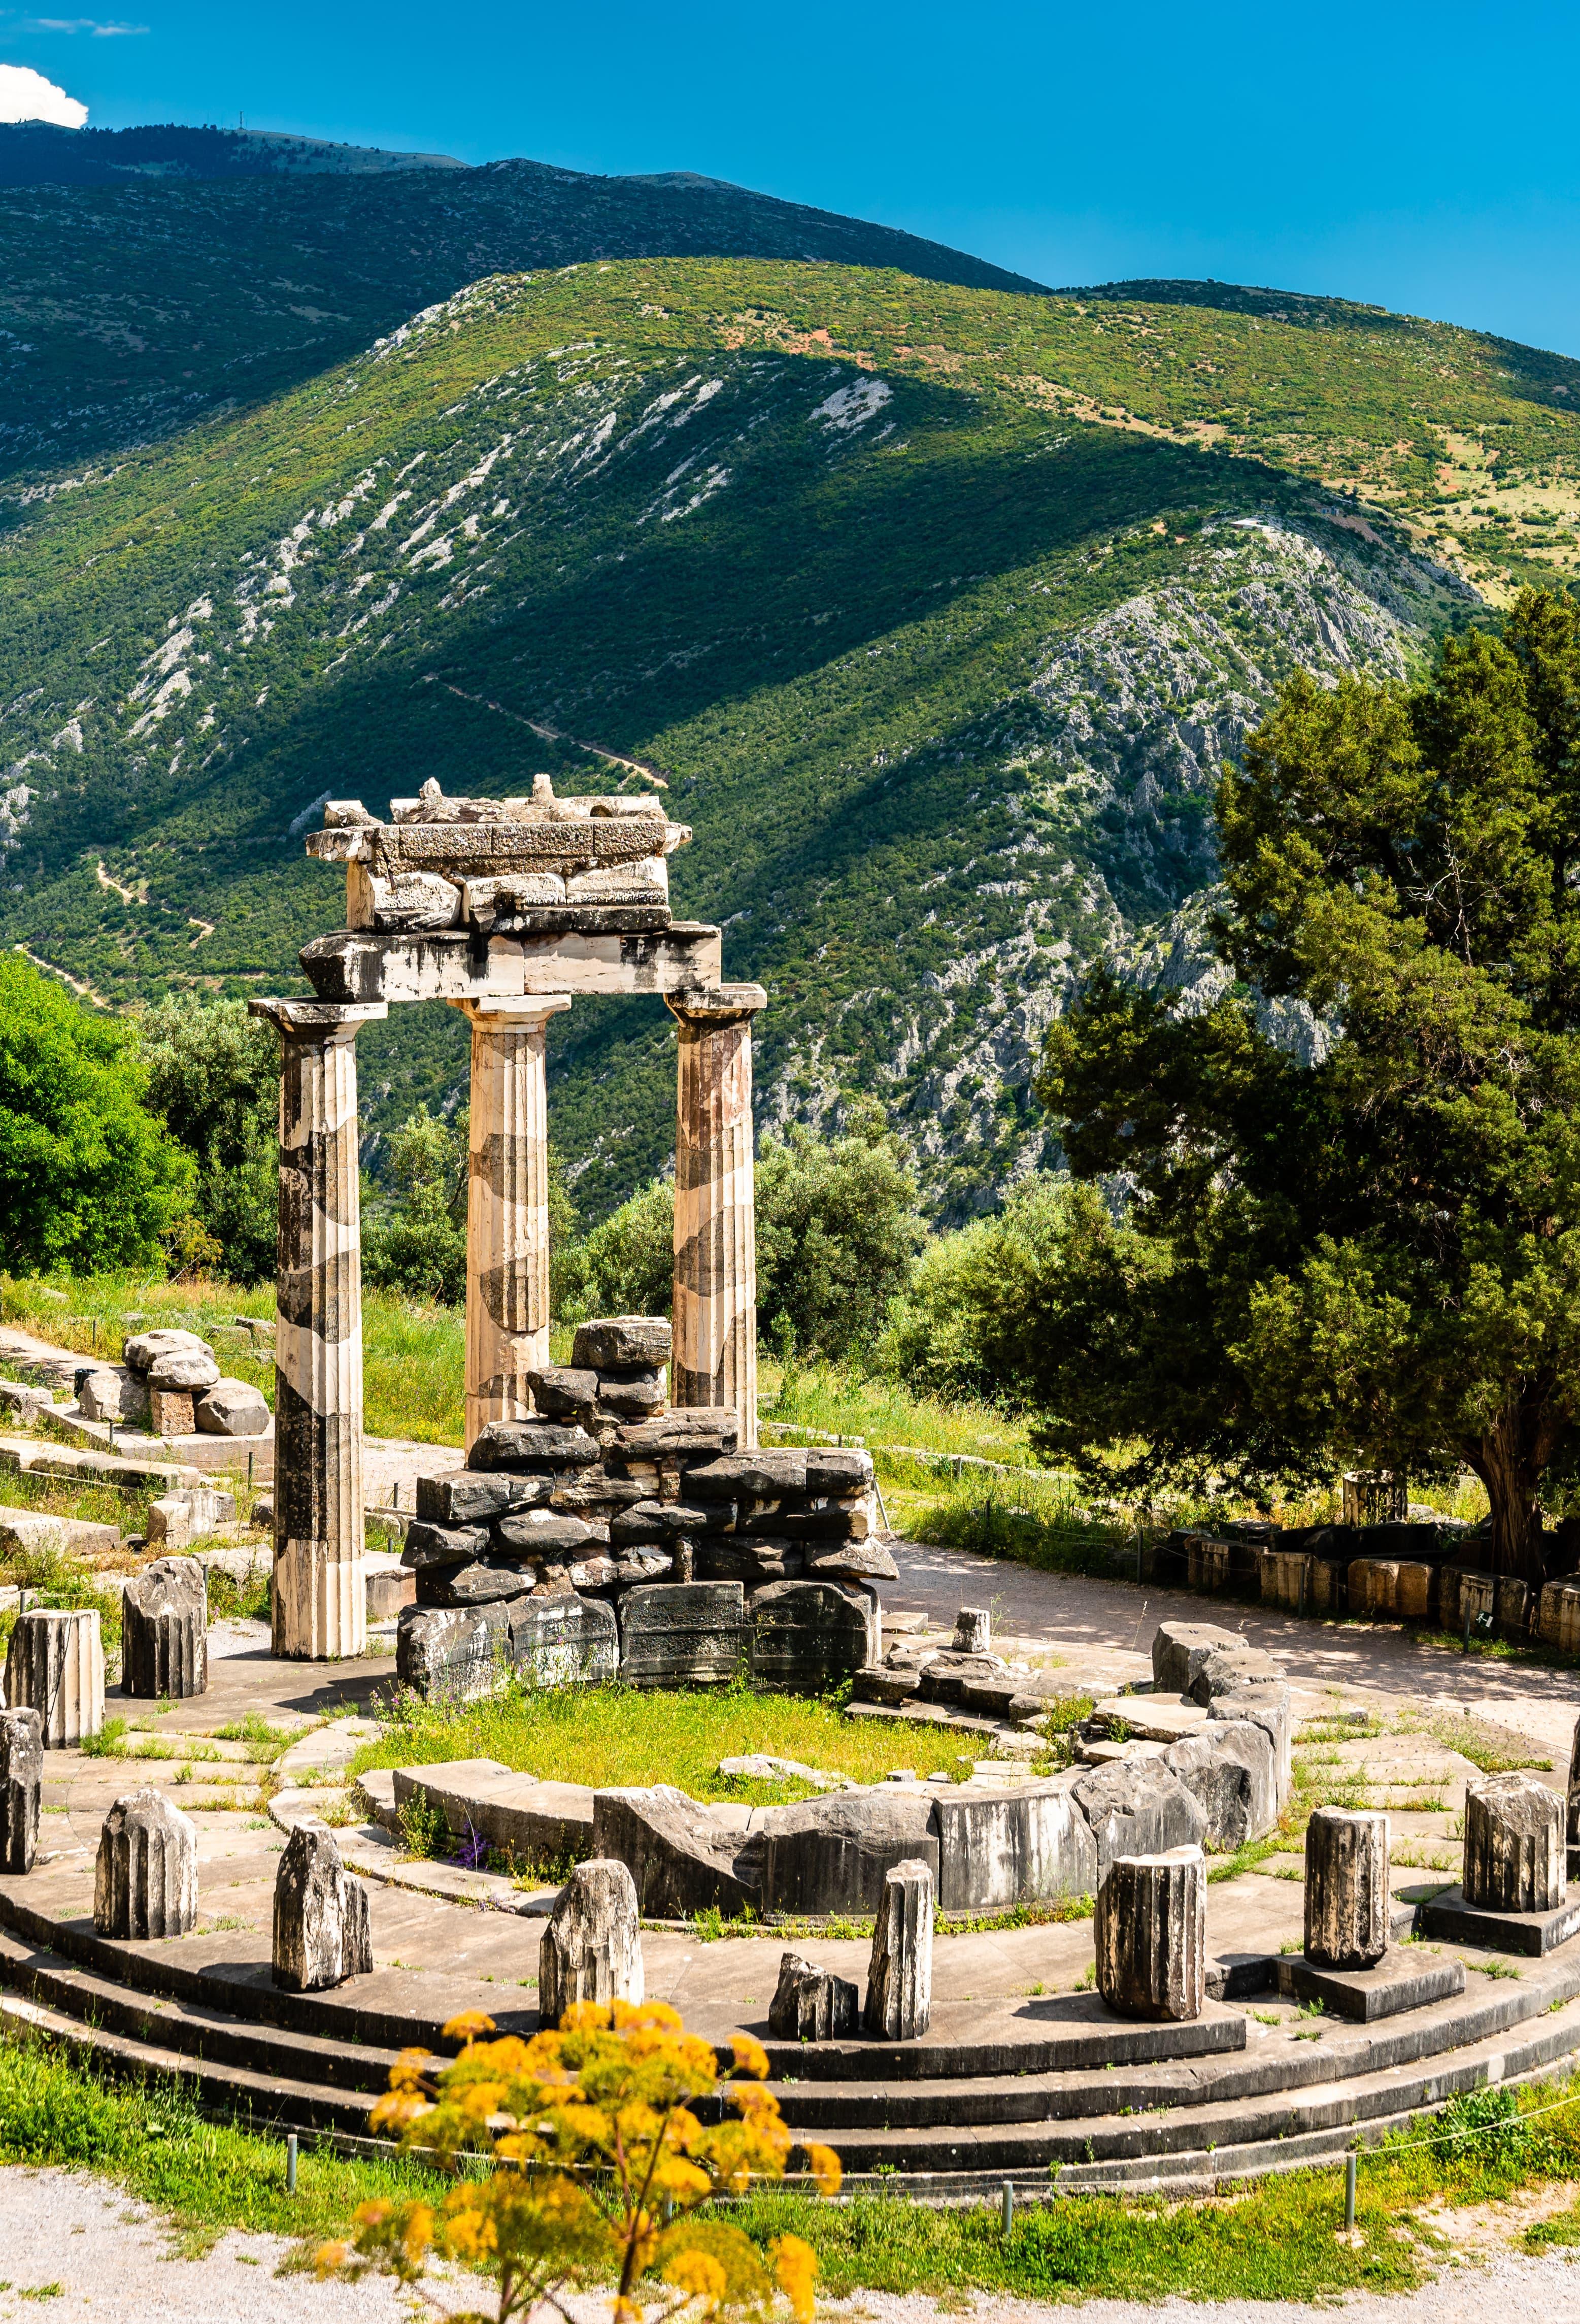 Tradition Tours is proud to include on your Greece tour